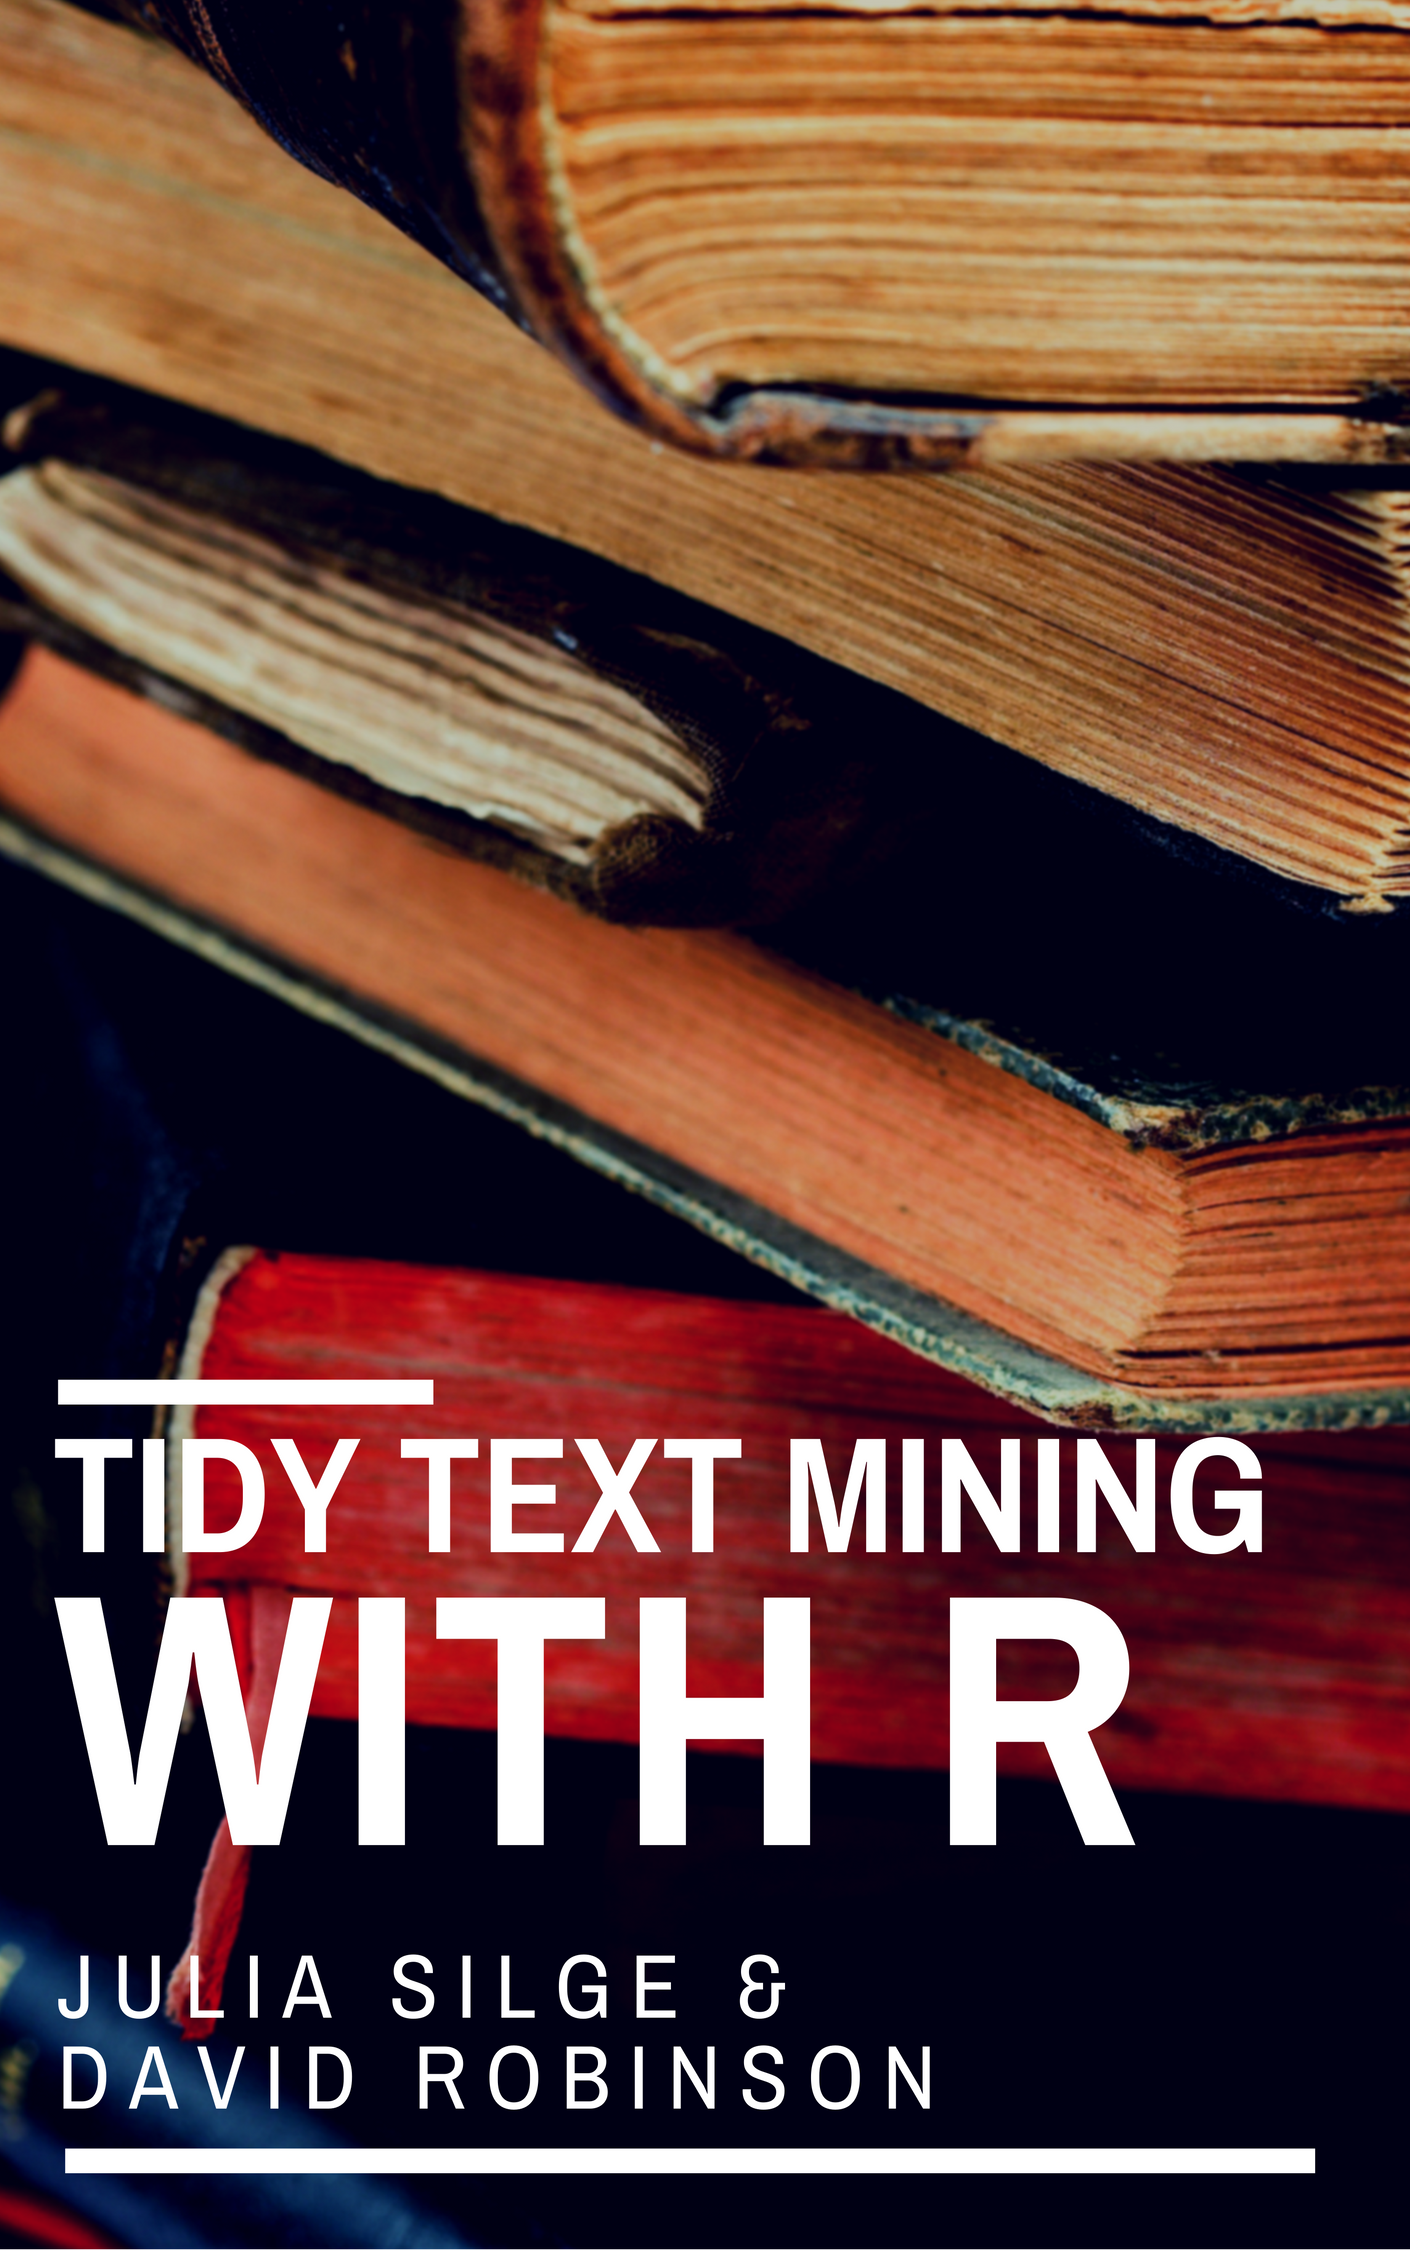 Tidy Text Mining with R